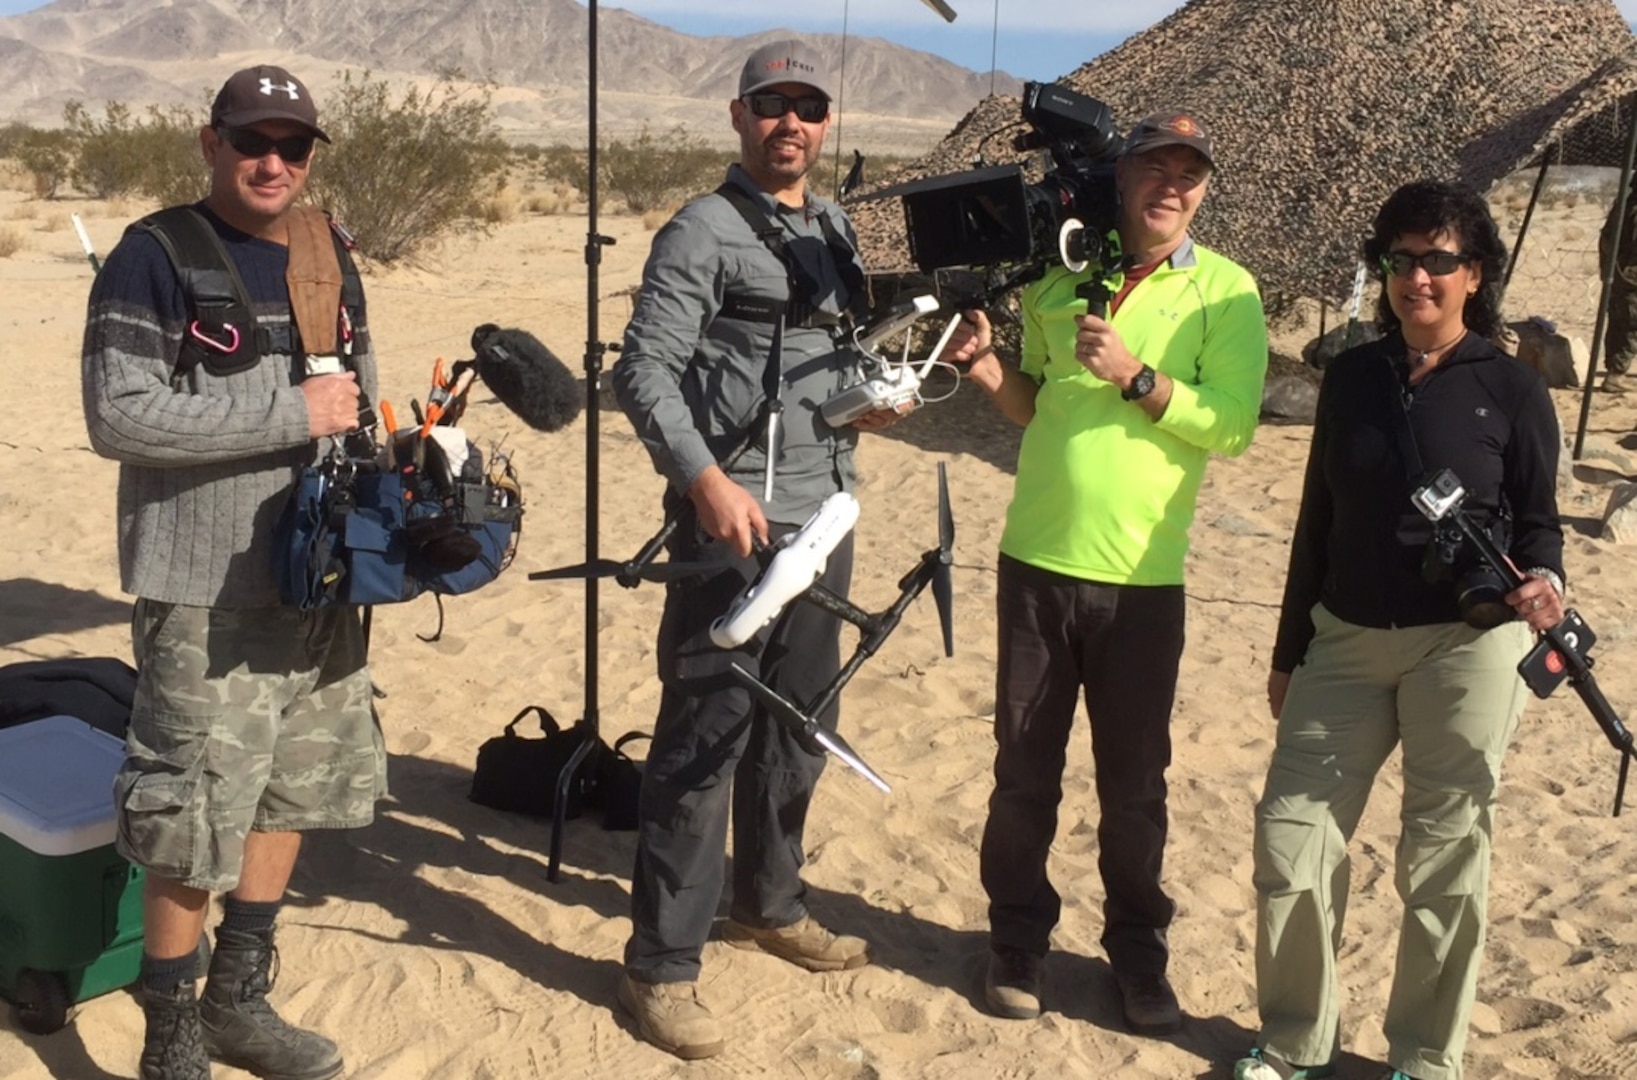 Nutan Chada (right), executive producer of the DLA Video Production Team, leads a contract crew on the “set” of Exercise Steel Knight, Twentynine Palms, California, for a Logistics On Location video December 2015.